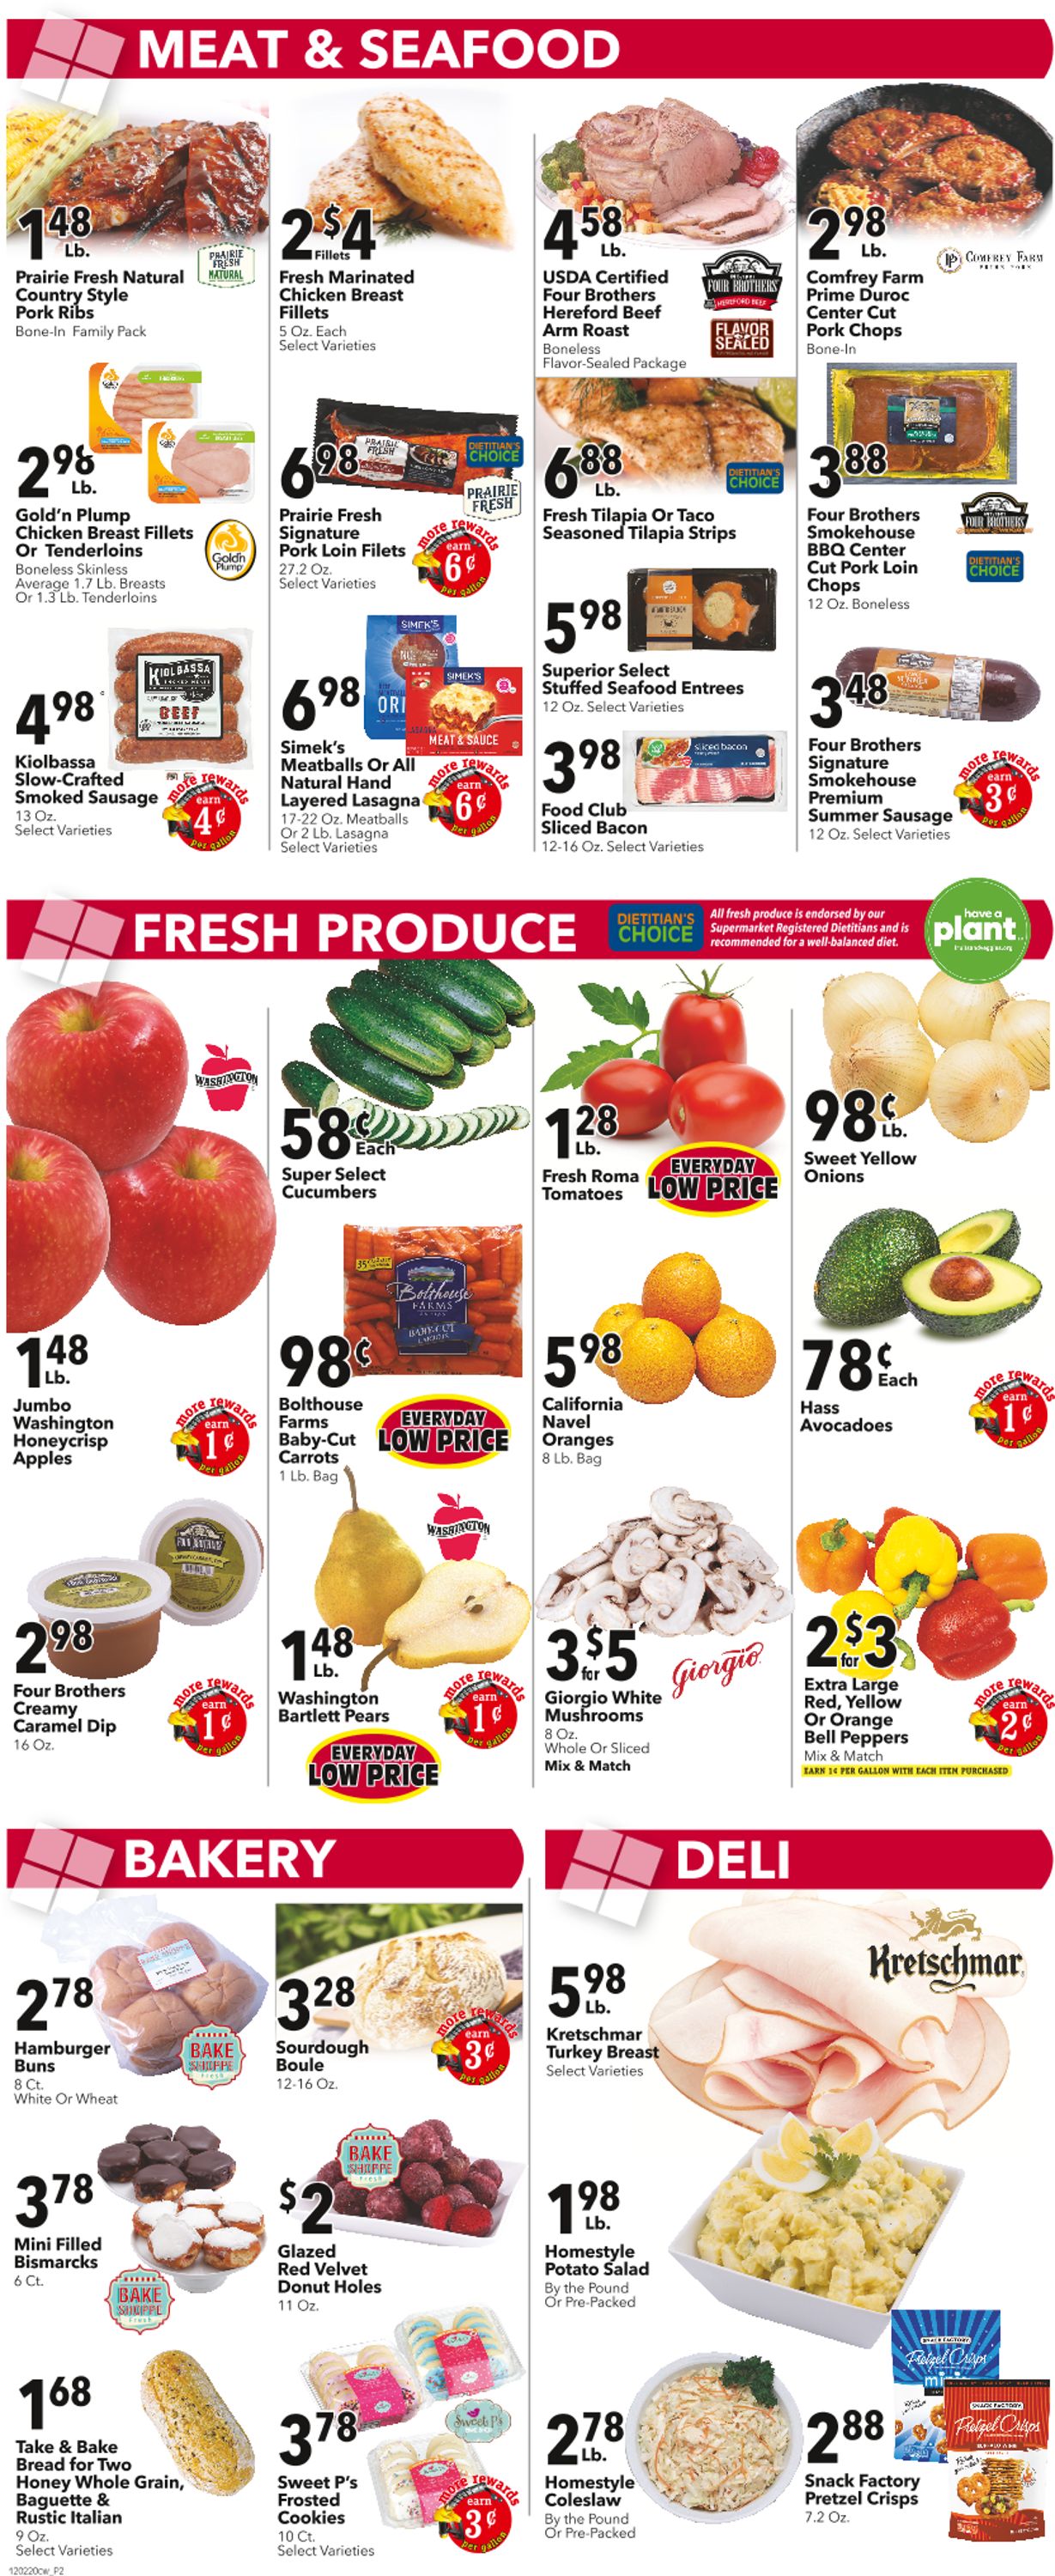 Cash Wise Weekly Ad Circular - valid 12/02-12/08/2020 (Page 2)